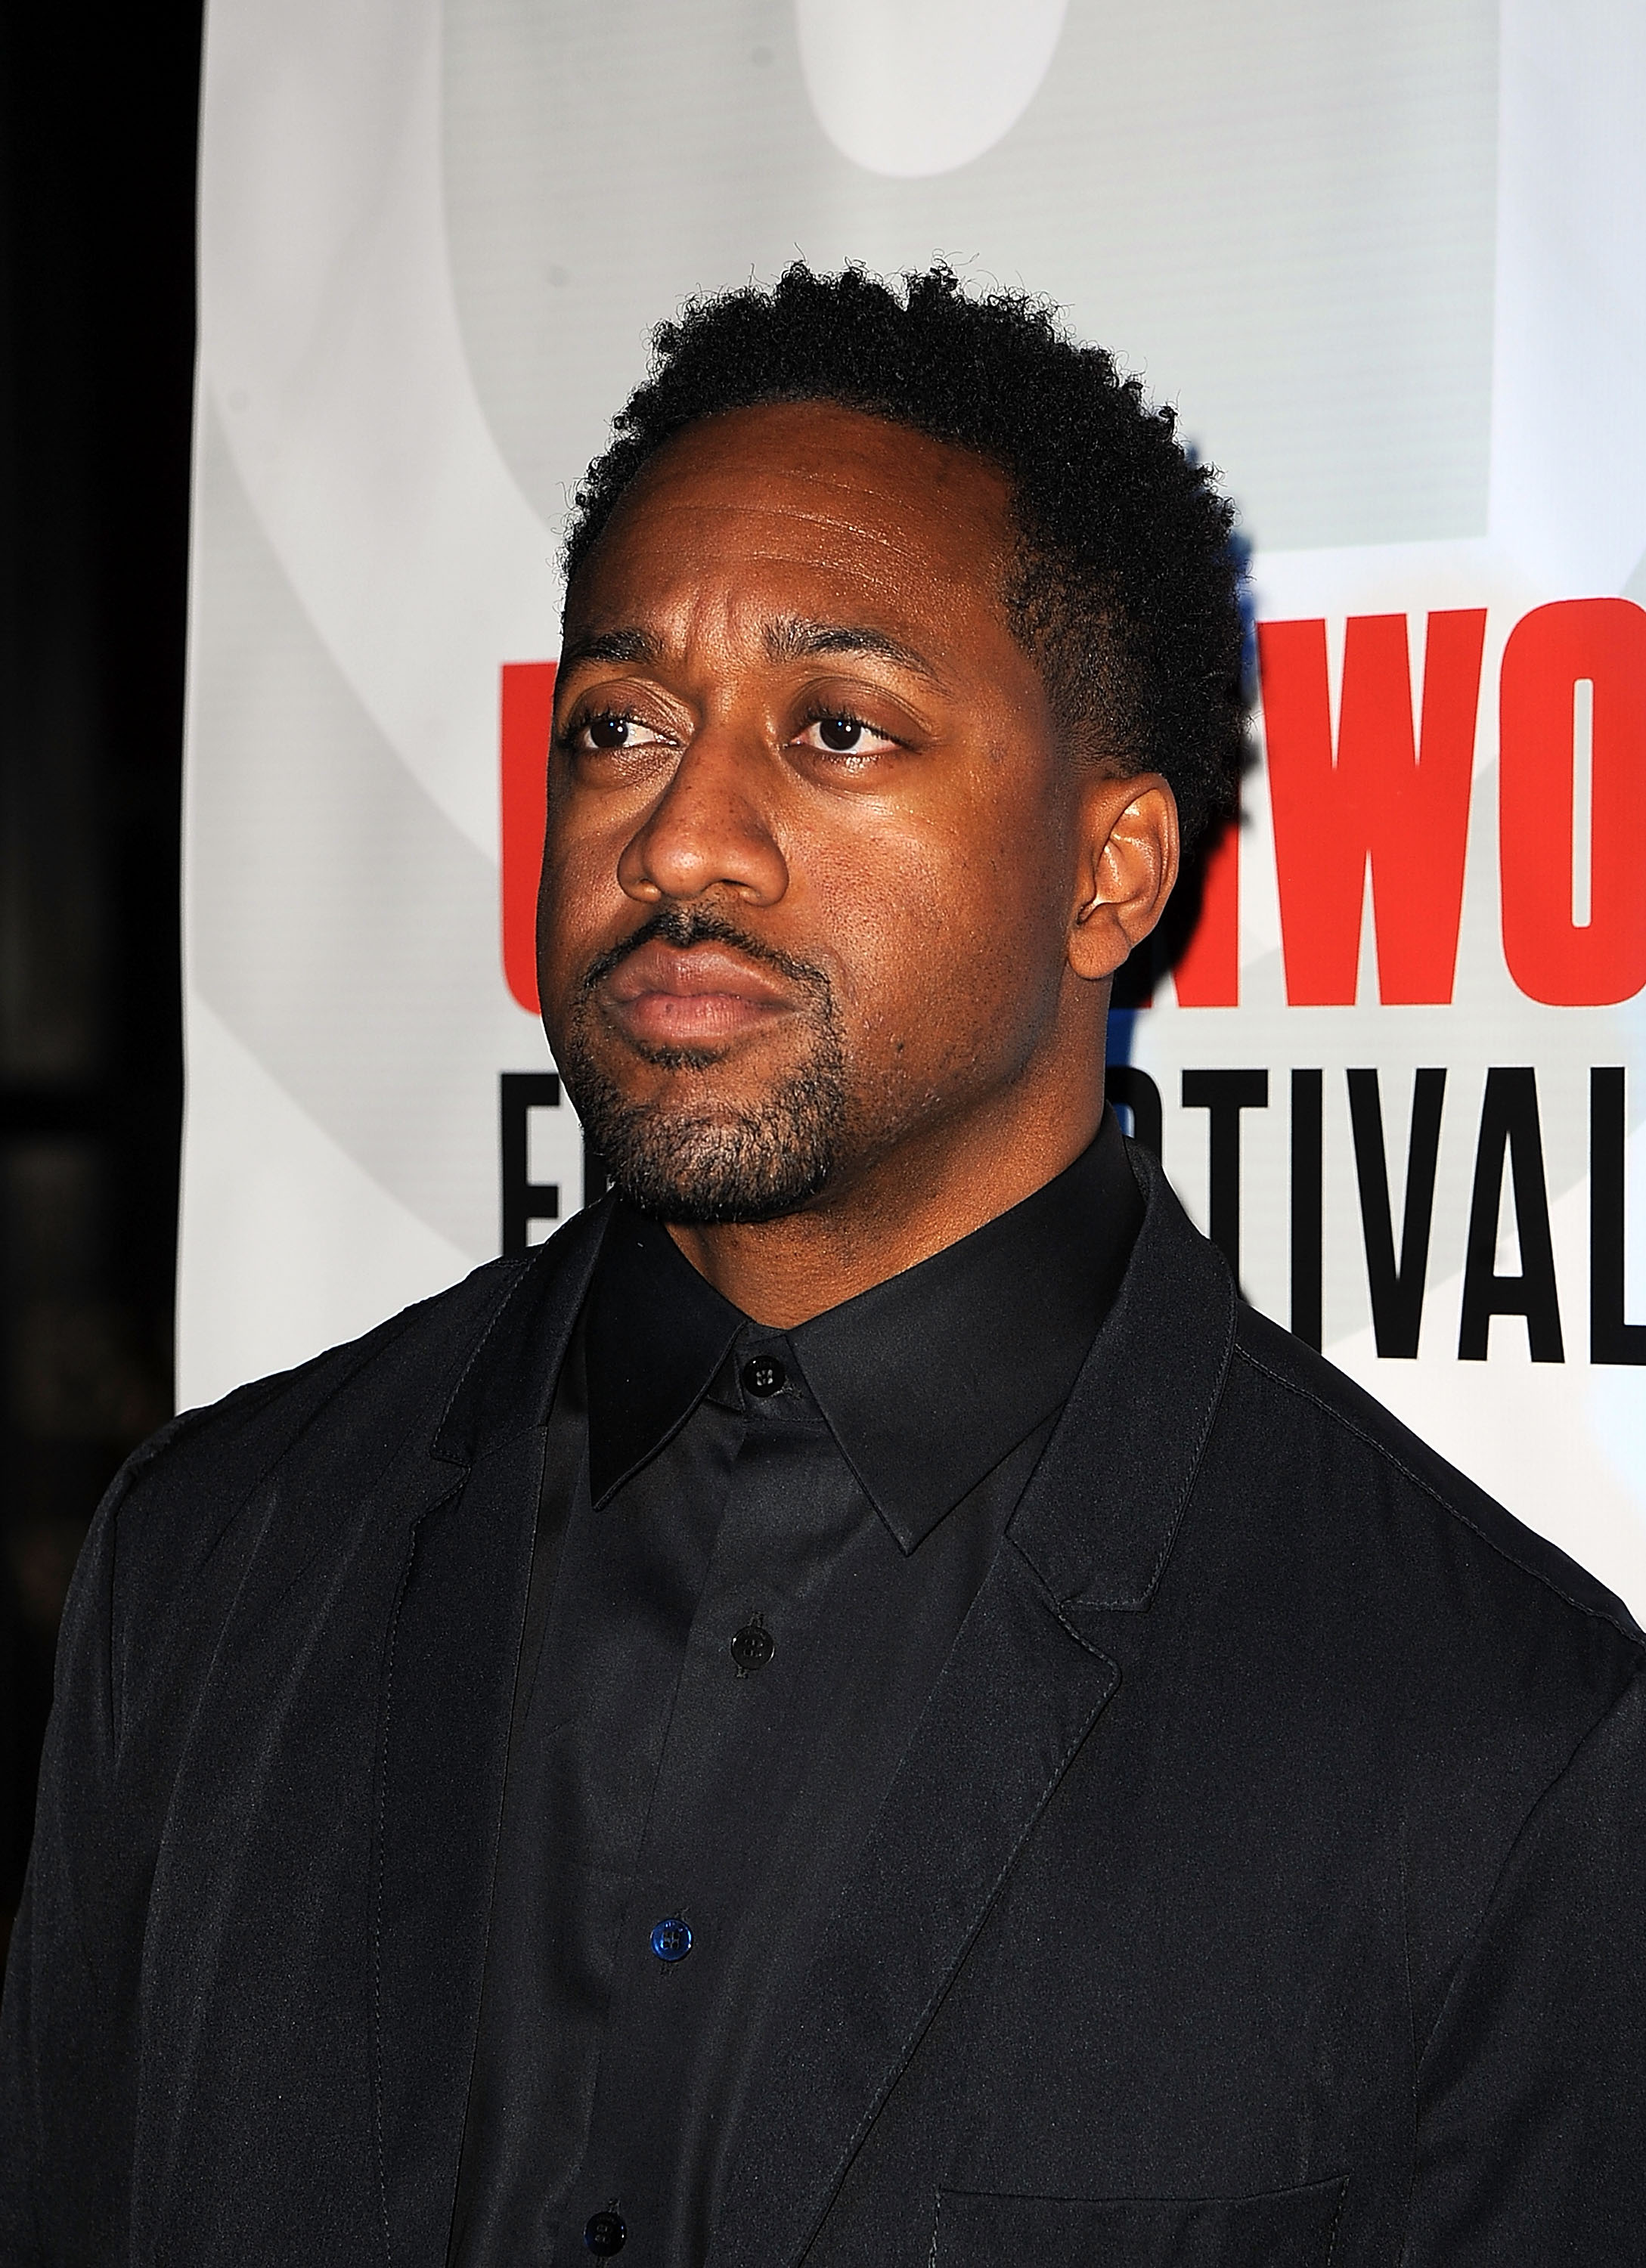 Jaleel White on September 23, 2015 in New York City | Photo: Getty Images